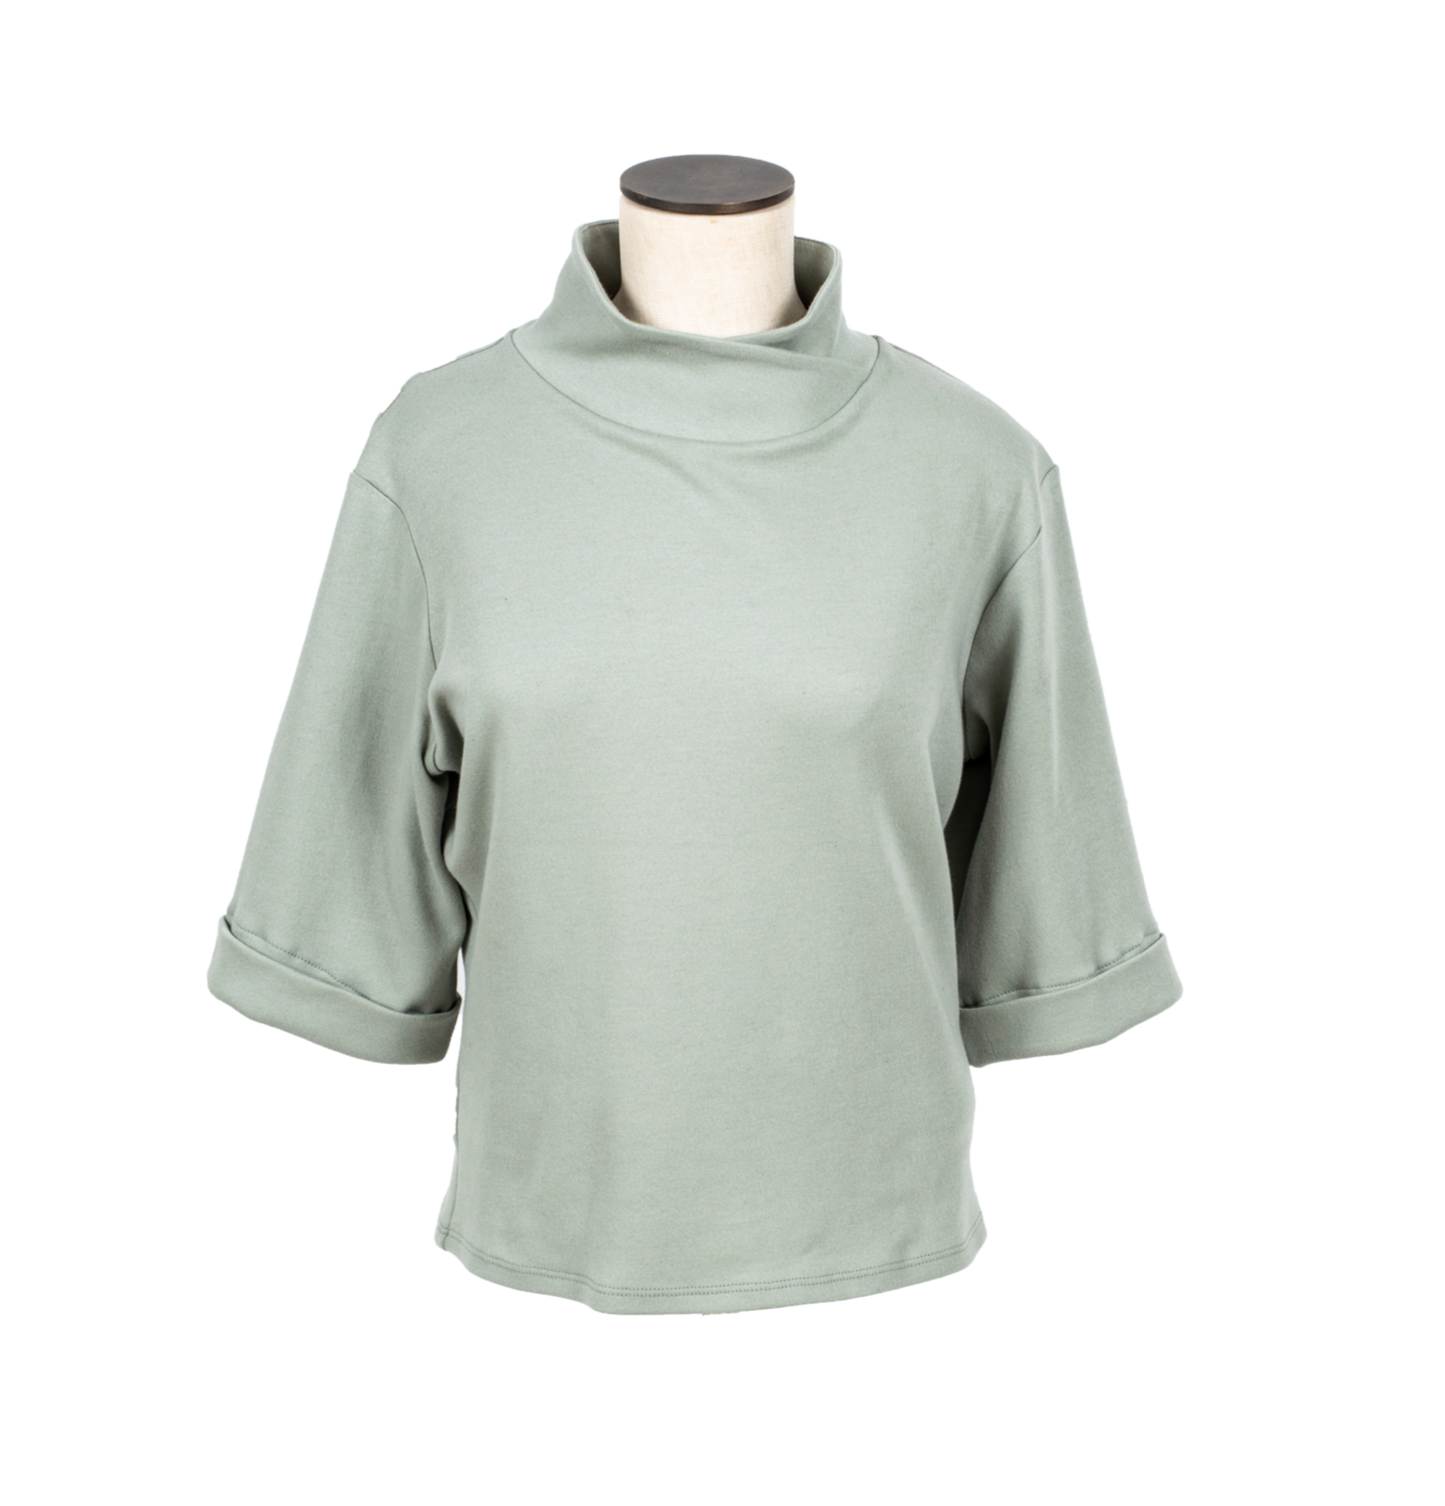 Sage sweater with short sleeves and fold over collar